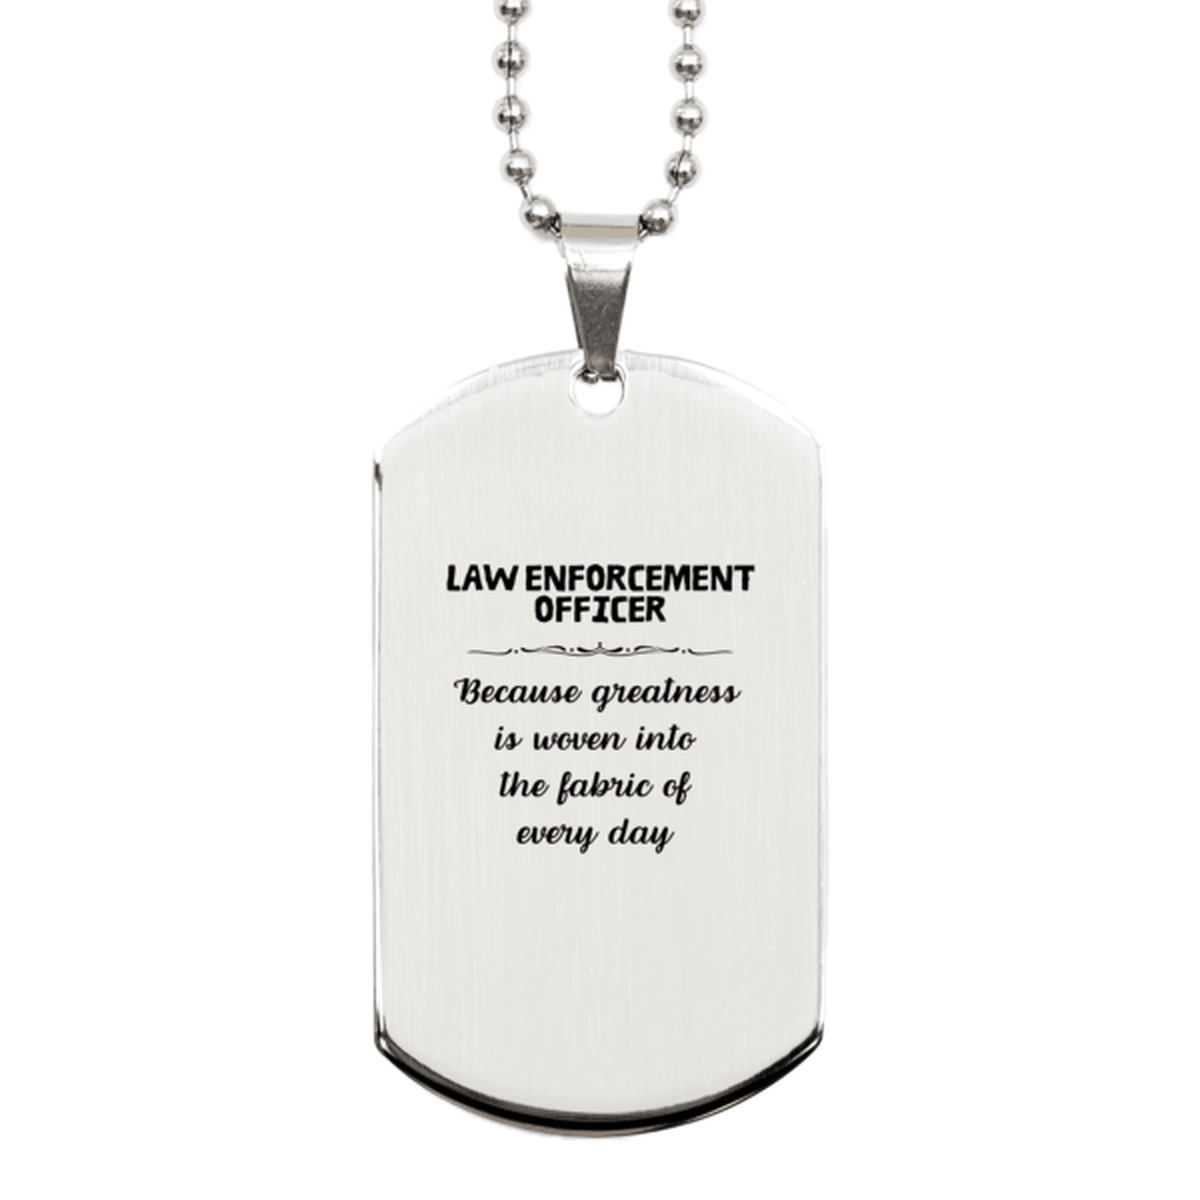 Sarcastic Law Enforcement Officer Silver Dog Tag Gifts, Christmas Holiday Gifts for Law Enforcement Officer Birthday, Law Enforcement Officer: Because greatness is woven into the fabric of every day, Coworkers, Friends - Mallard Moon Gift Shop